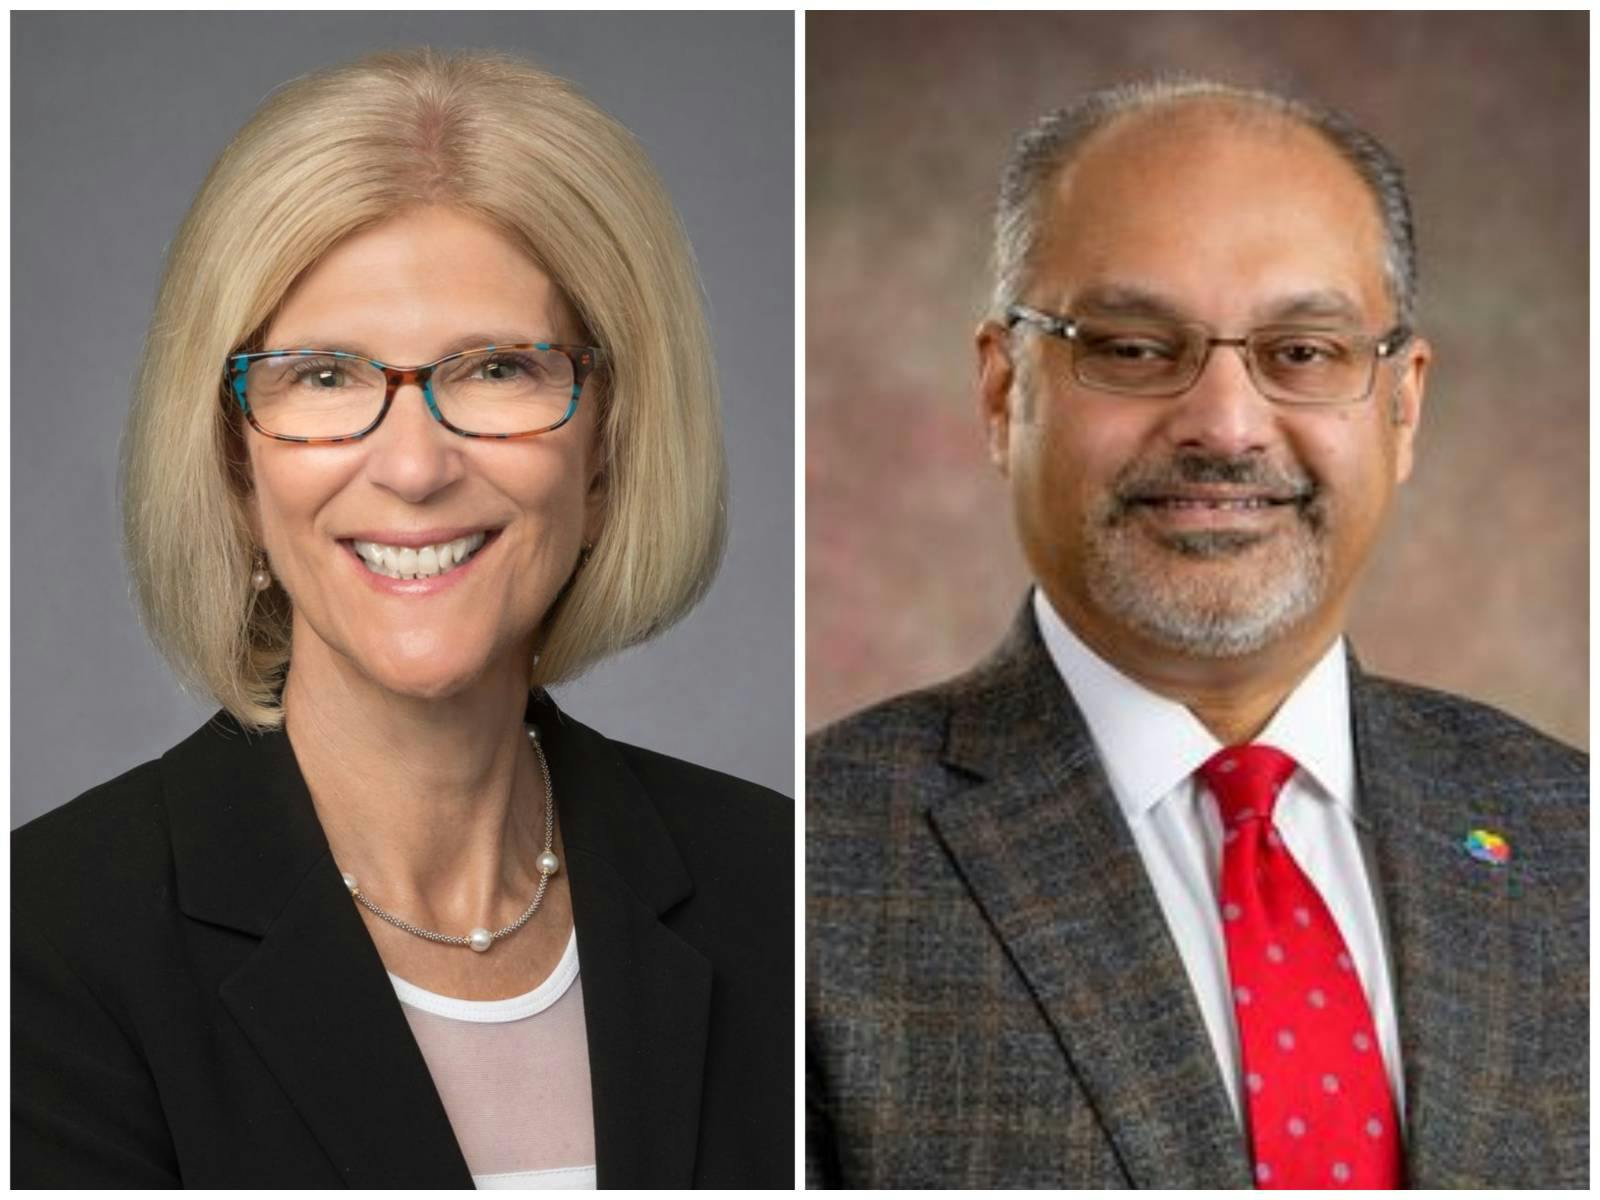 Cathy Jacobson, president and CEO of Froedtert Health, and Imran A. Andrabi, president and CEO of ThedaCare. The two Wisconsin hospital systems are planning to merge into one organization. (Photos provided by Froedtert Health)